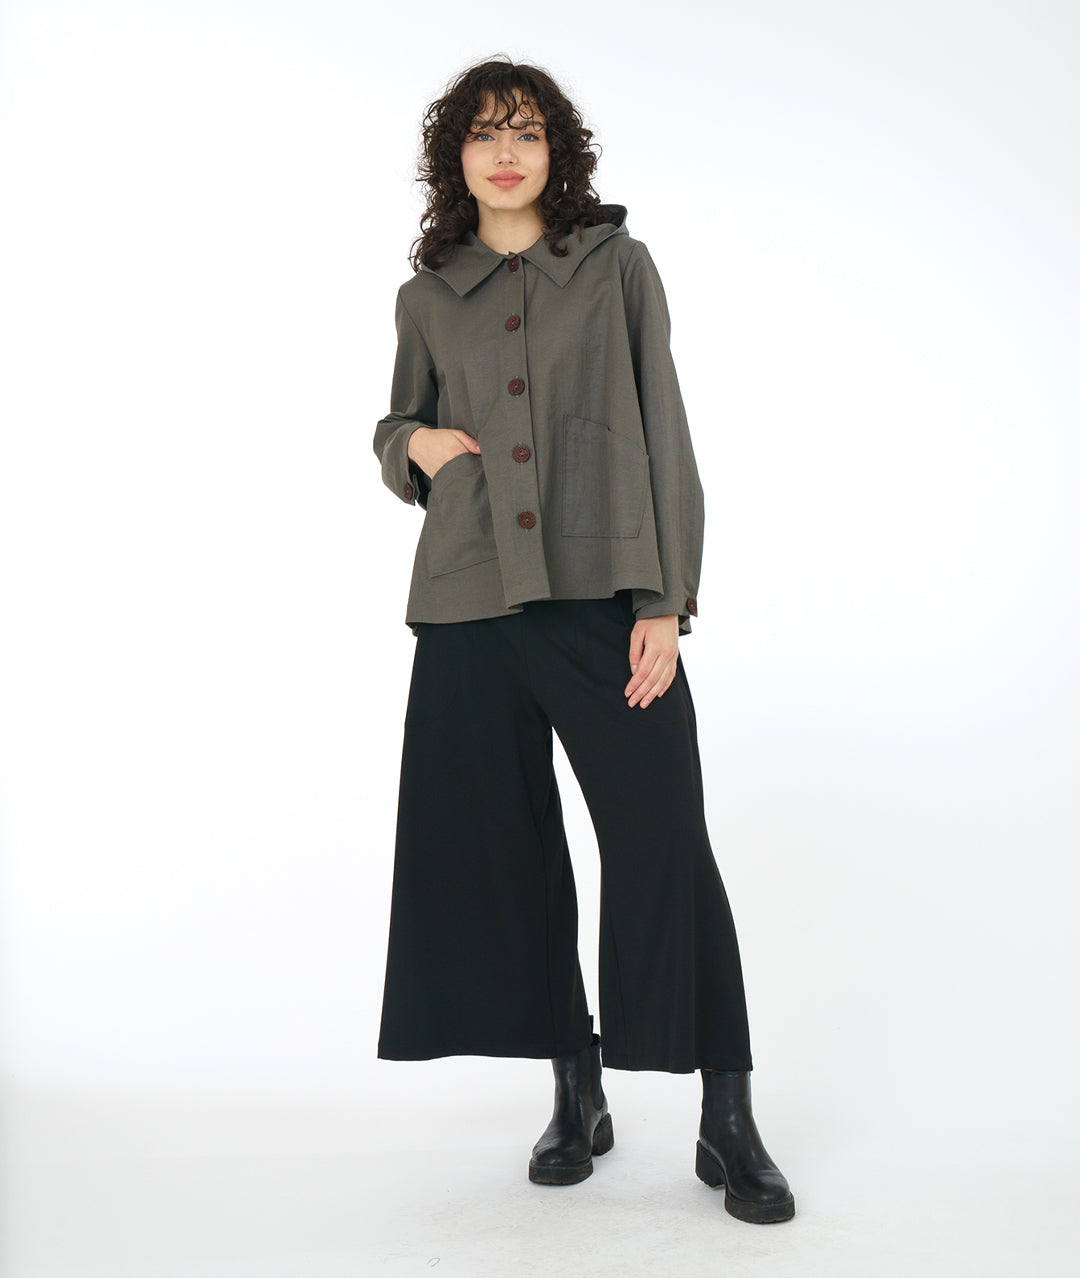 model in a grey/green boxy hooded jacket, worn with a wide leg black ankle length pant